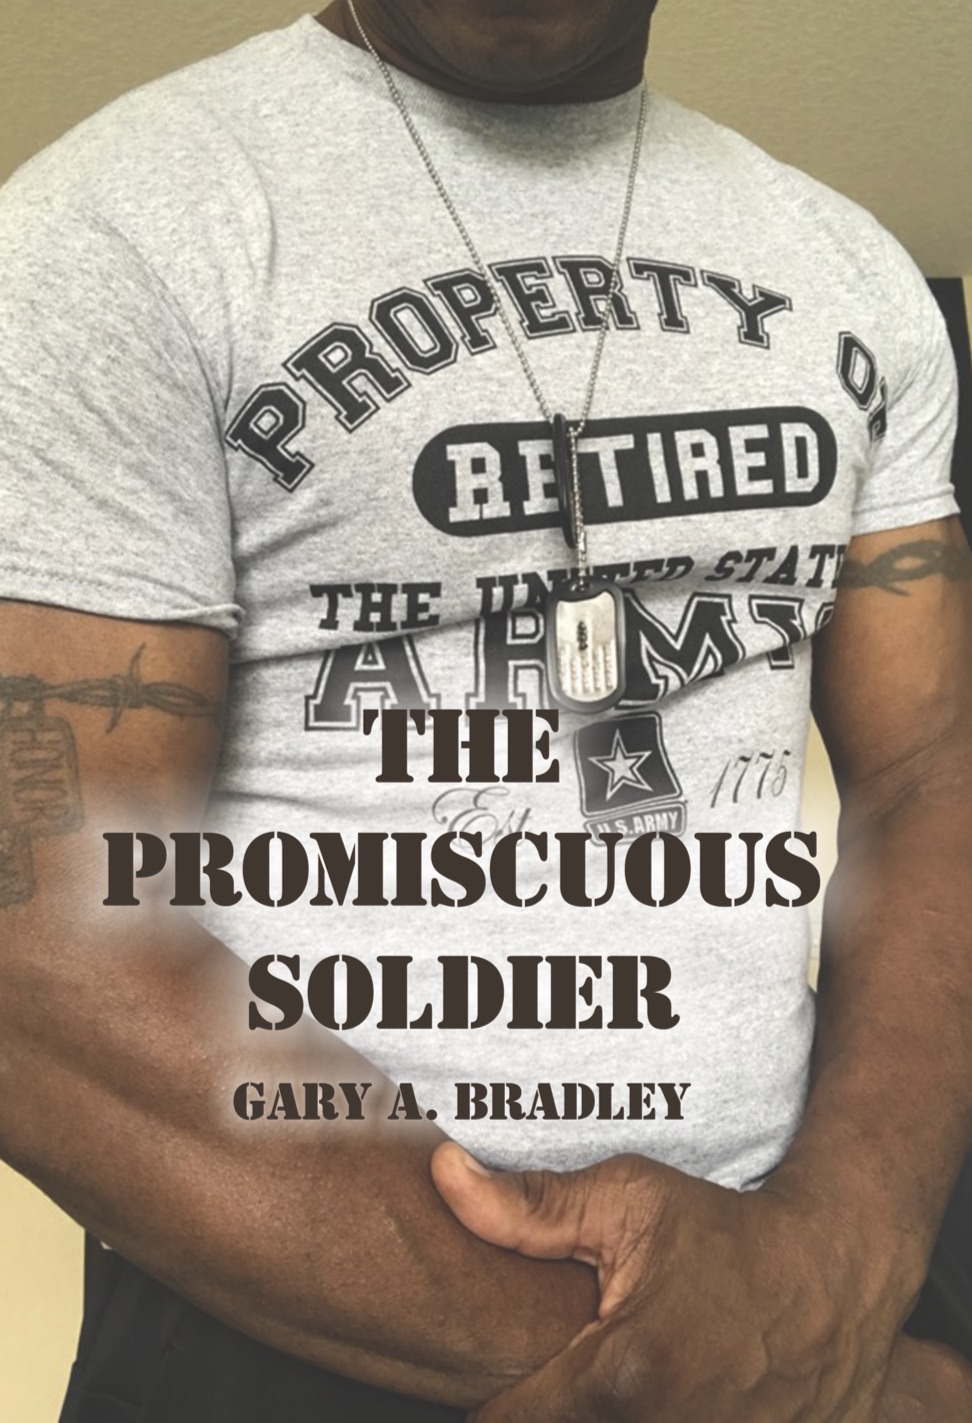 The Promiscuous Soldier